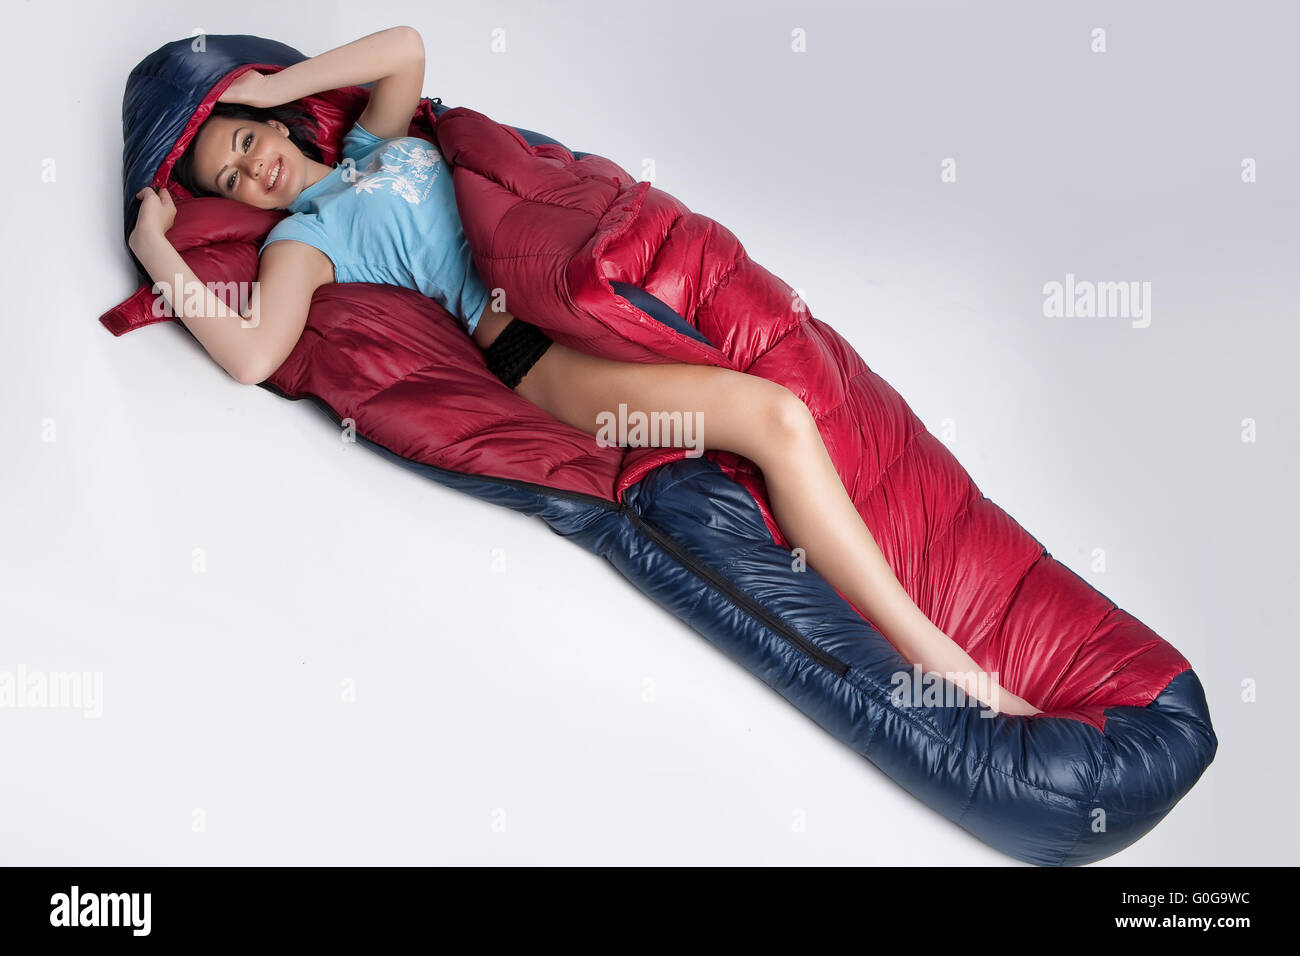 Image result for woman in sleeping bag